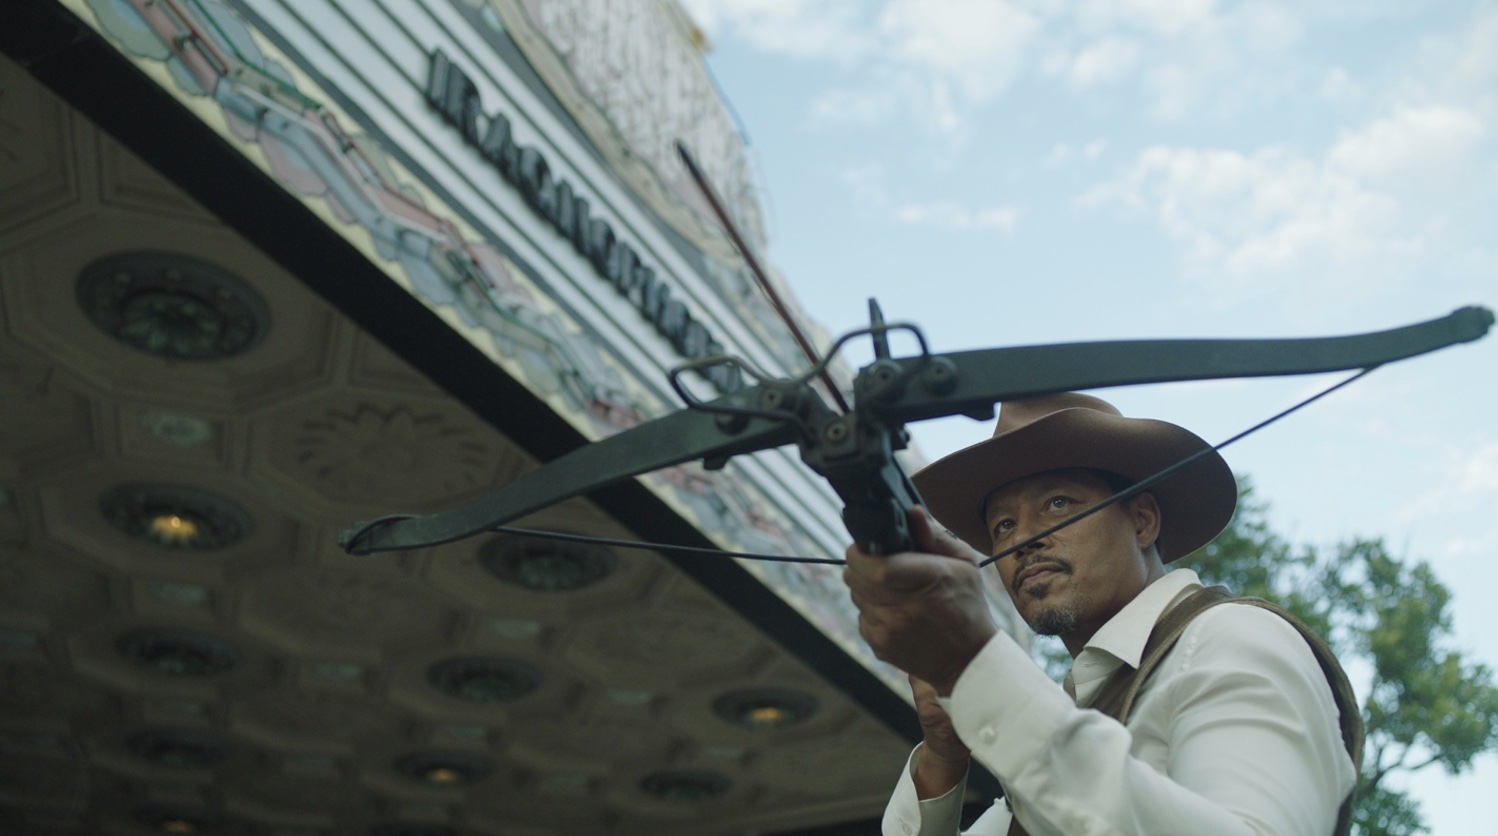 Terrence Howard holds a crossbow in front of a movie marquee while wearing a cowboy hat in Showdown at the Grand.